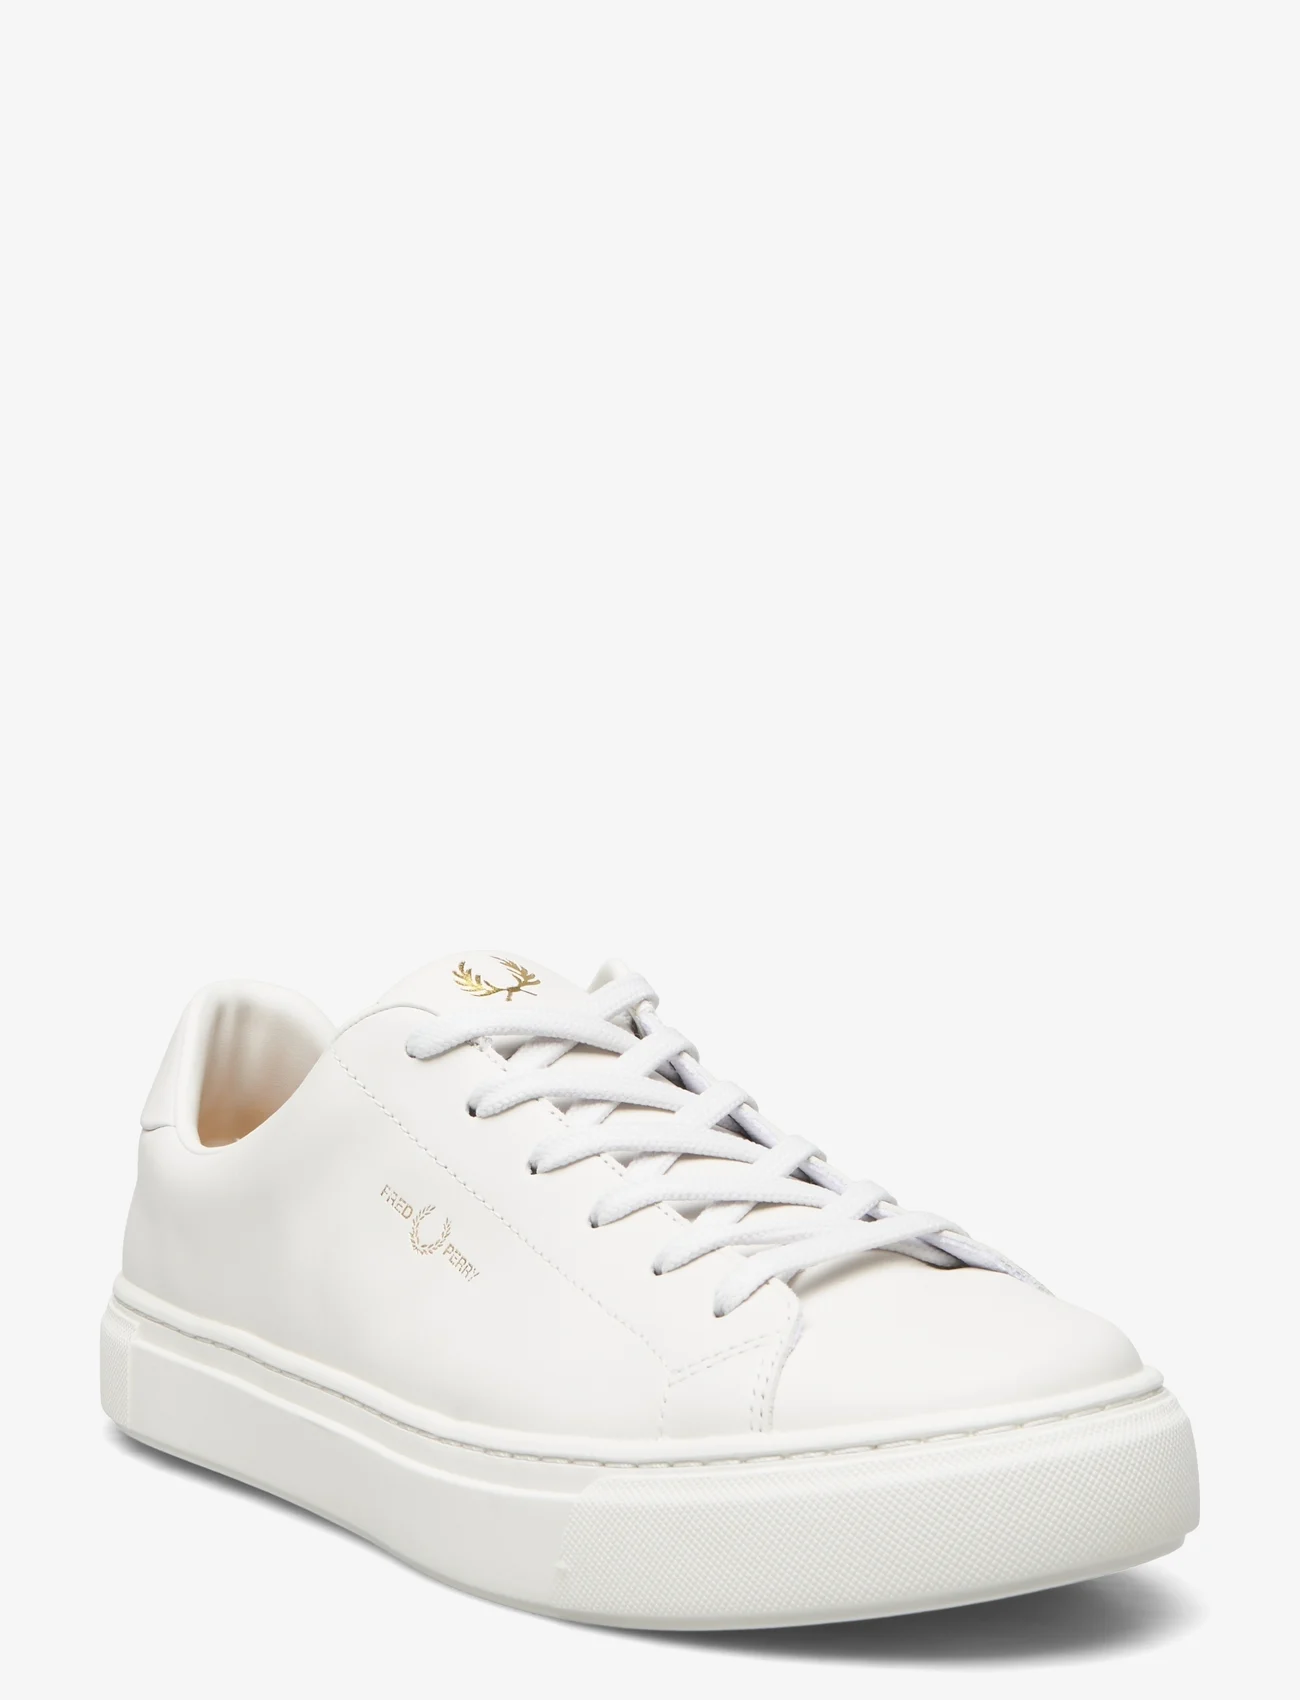 Fred Perry - B71 LEATHER - låga sneakers - porcelain - 0